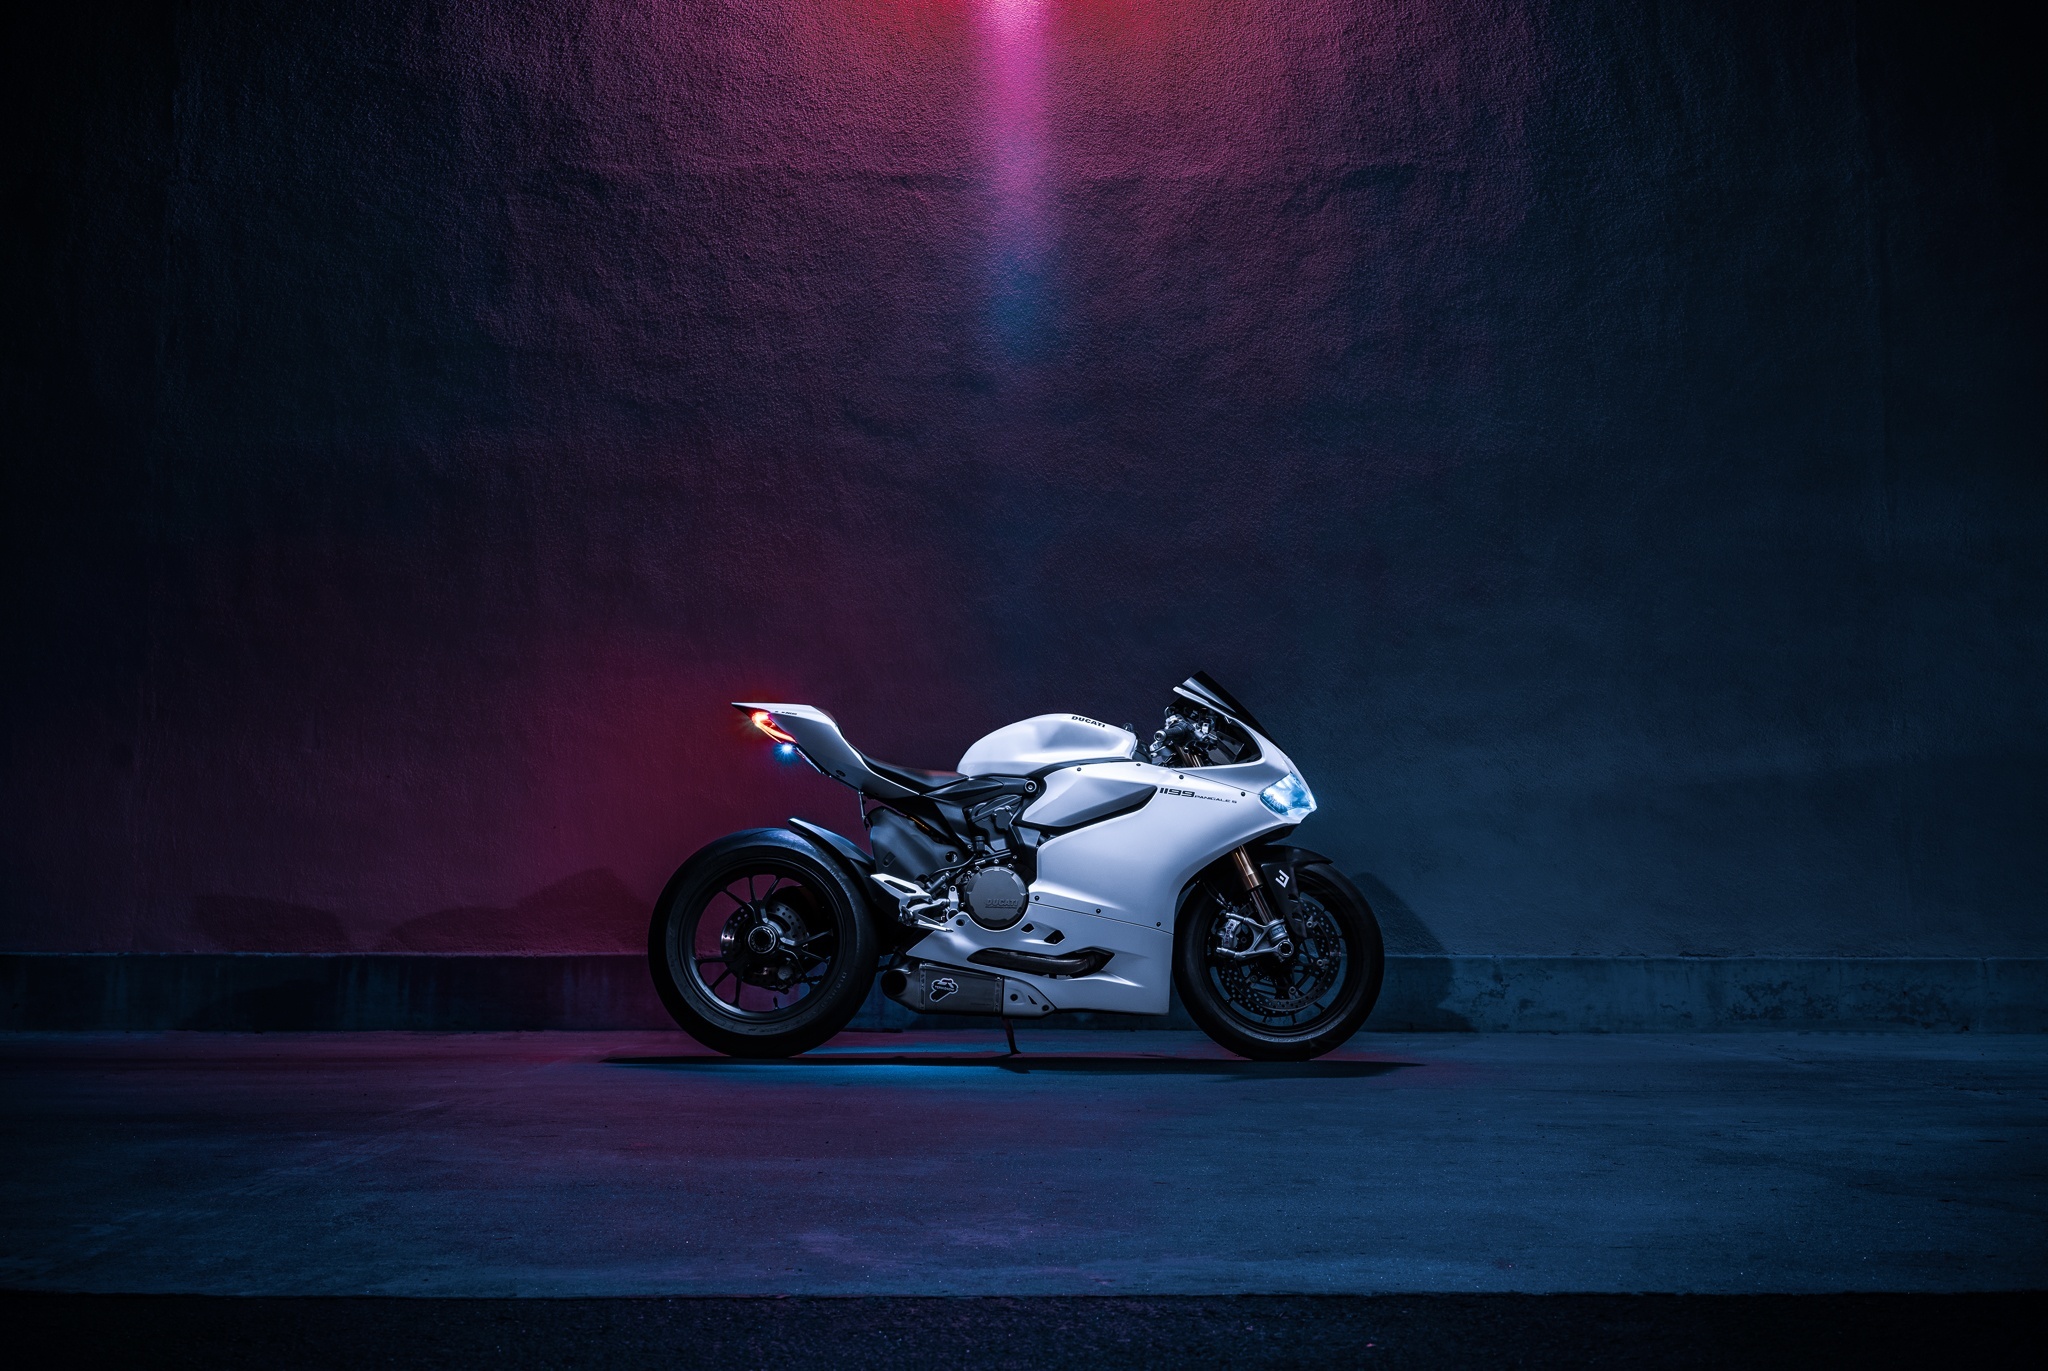 ducati, motorcycles, motorcycle, panigale, 1199s